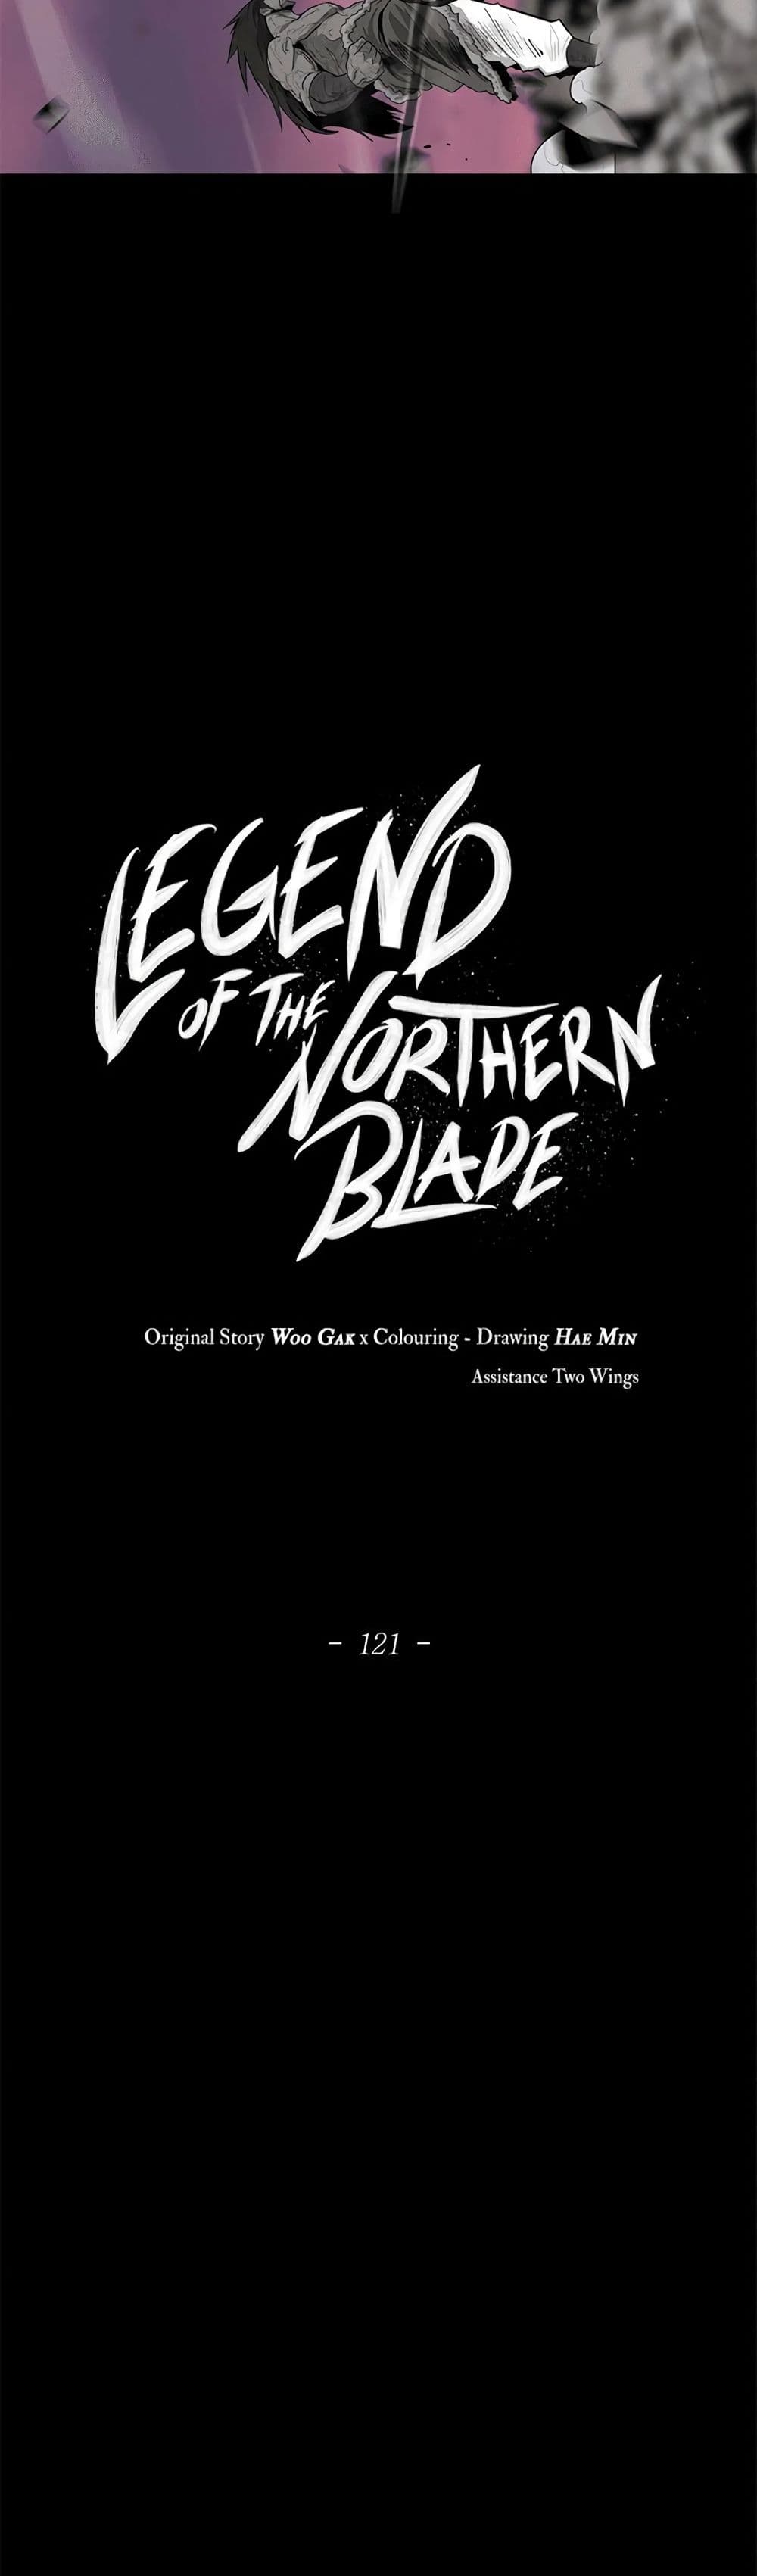 Legend of the Northern Blade 121-121